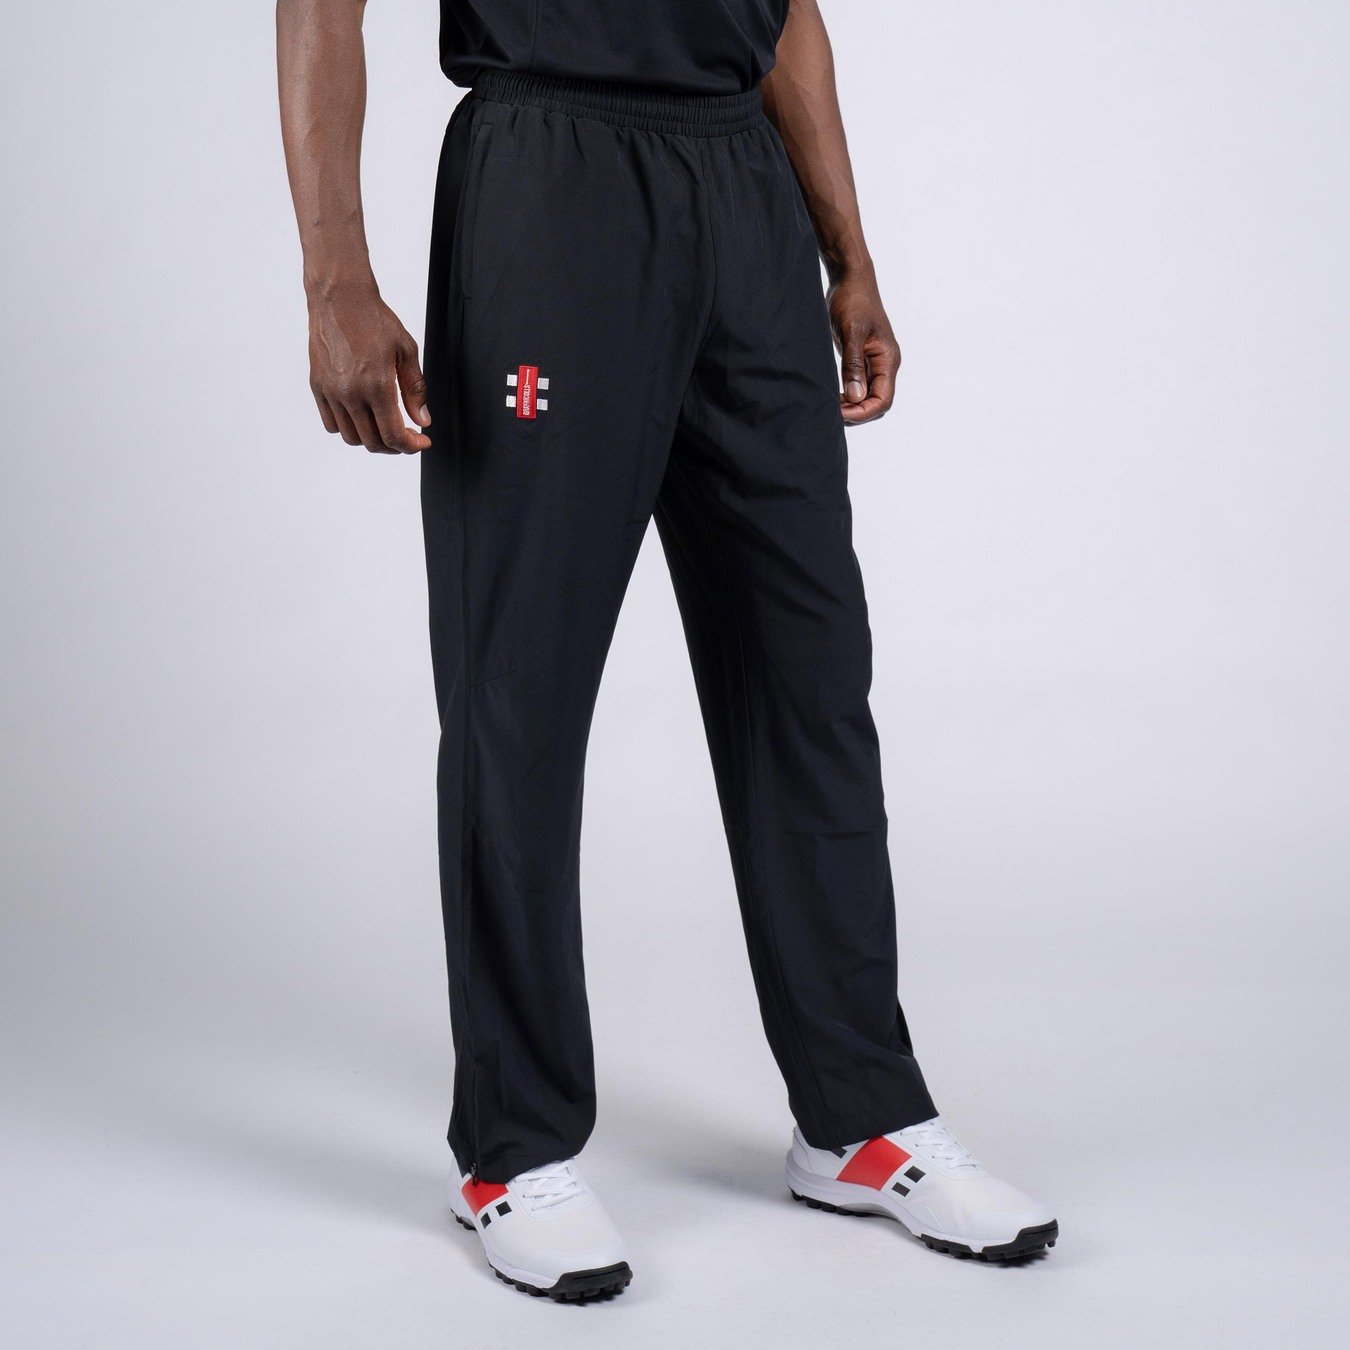 CCFA22Clothing Trousers Training Velocity Black 1 Right Side